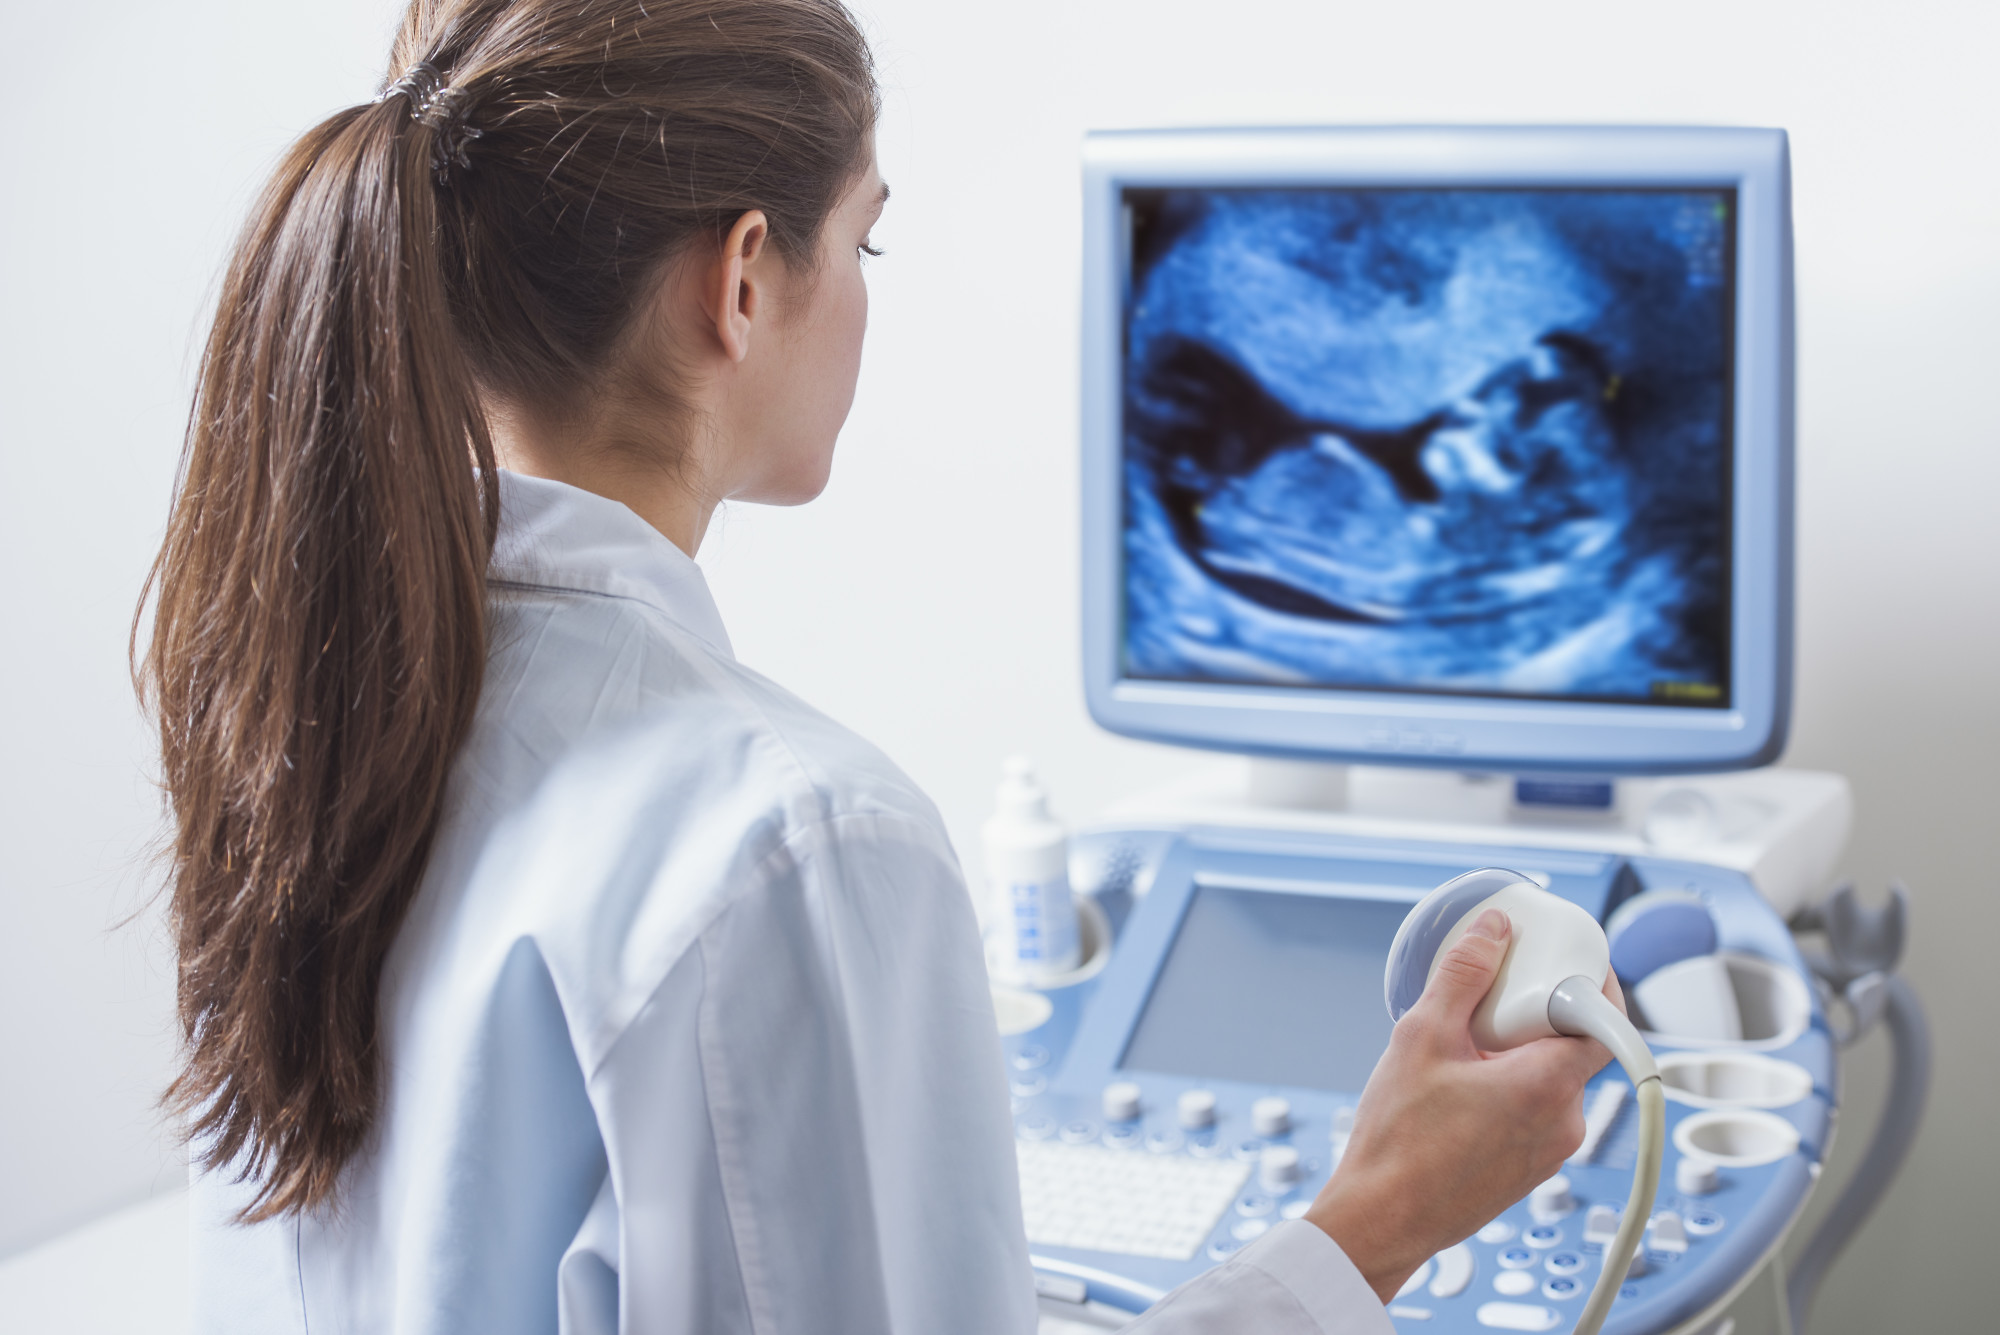 How to Become an Ultrasound Technician: The Steps Explained